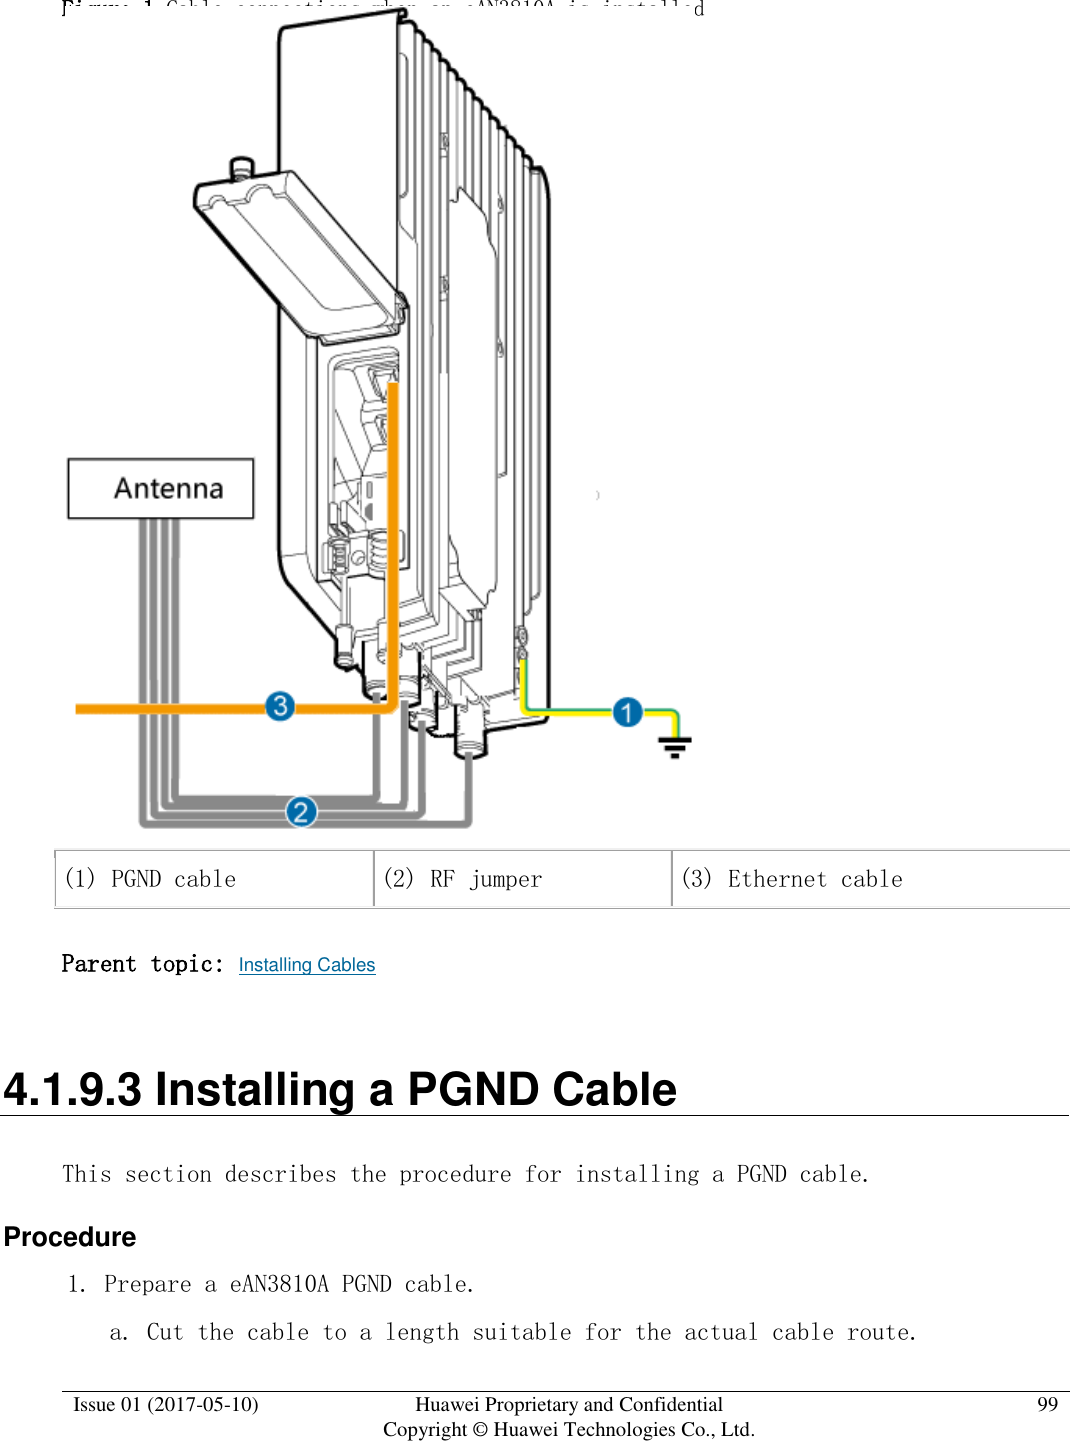  Issue 01 (2017-05-10) Huawei Proprietary and Confidential      Copyright © Huawei Technologies Co., Ltd. 99  Figure 1 Cable connections when an eAN3810A is installed   (1) PGND cable (2) RF jumper (3) Ethernet cable Parent topic: Installing Cables 4.1.9.3 Installing a PGND Cable This section describes the procedure for installing a PGND cable. Procedure 1. Prepare a eAN3810A PGND cable.  a. Cut the cable to a length suitable for the actual cable route. 